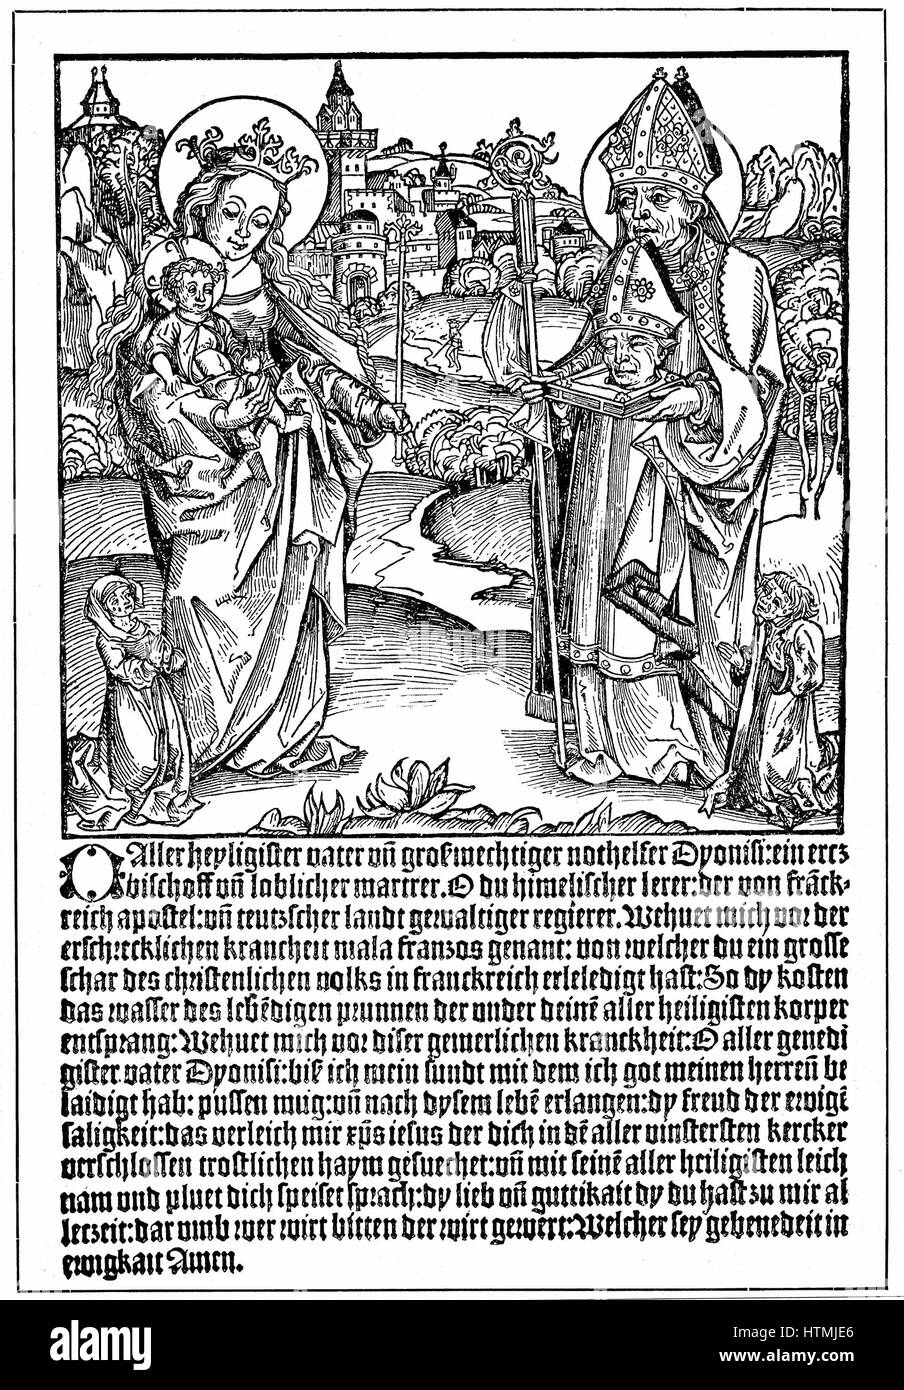 St Dionysius (Denis) praying to the Virgin and Child for help to overcome the curse of Syphilis. Early woodcut from flysheet published Regensberg. German publication refers to it as the French disease. Italian-born patron saint of Paris and its first bish Stock Photo